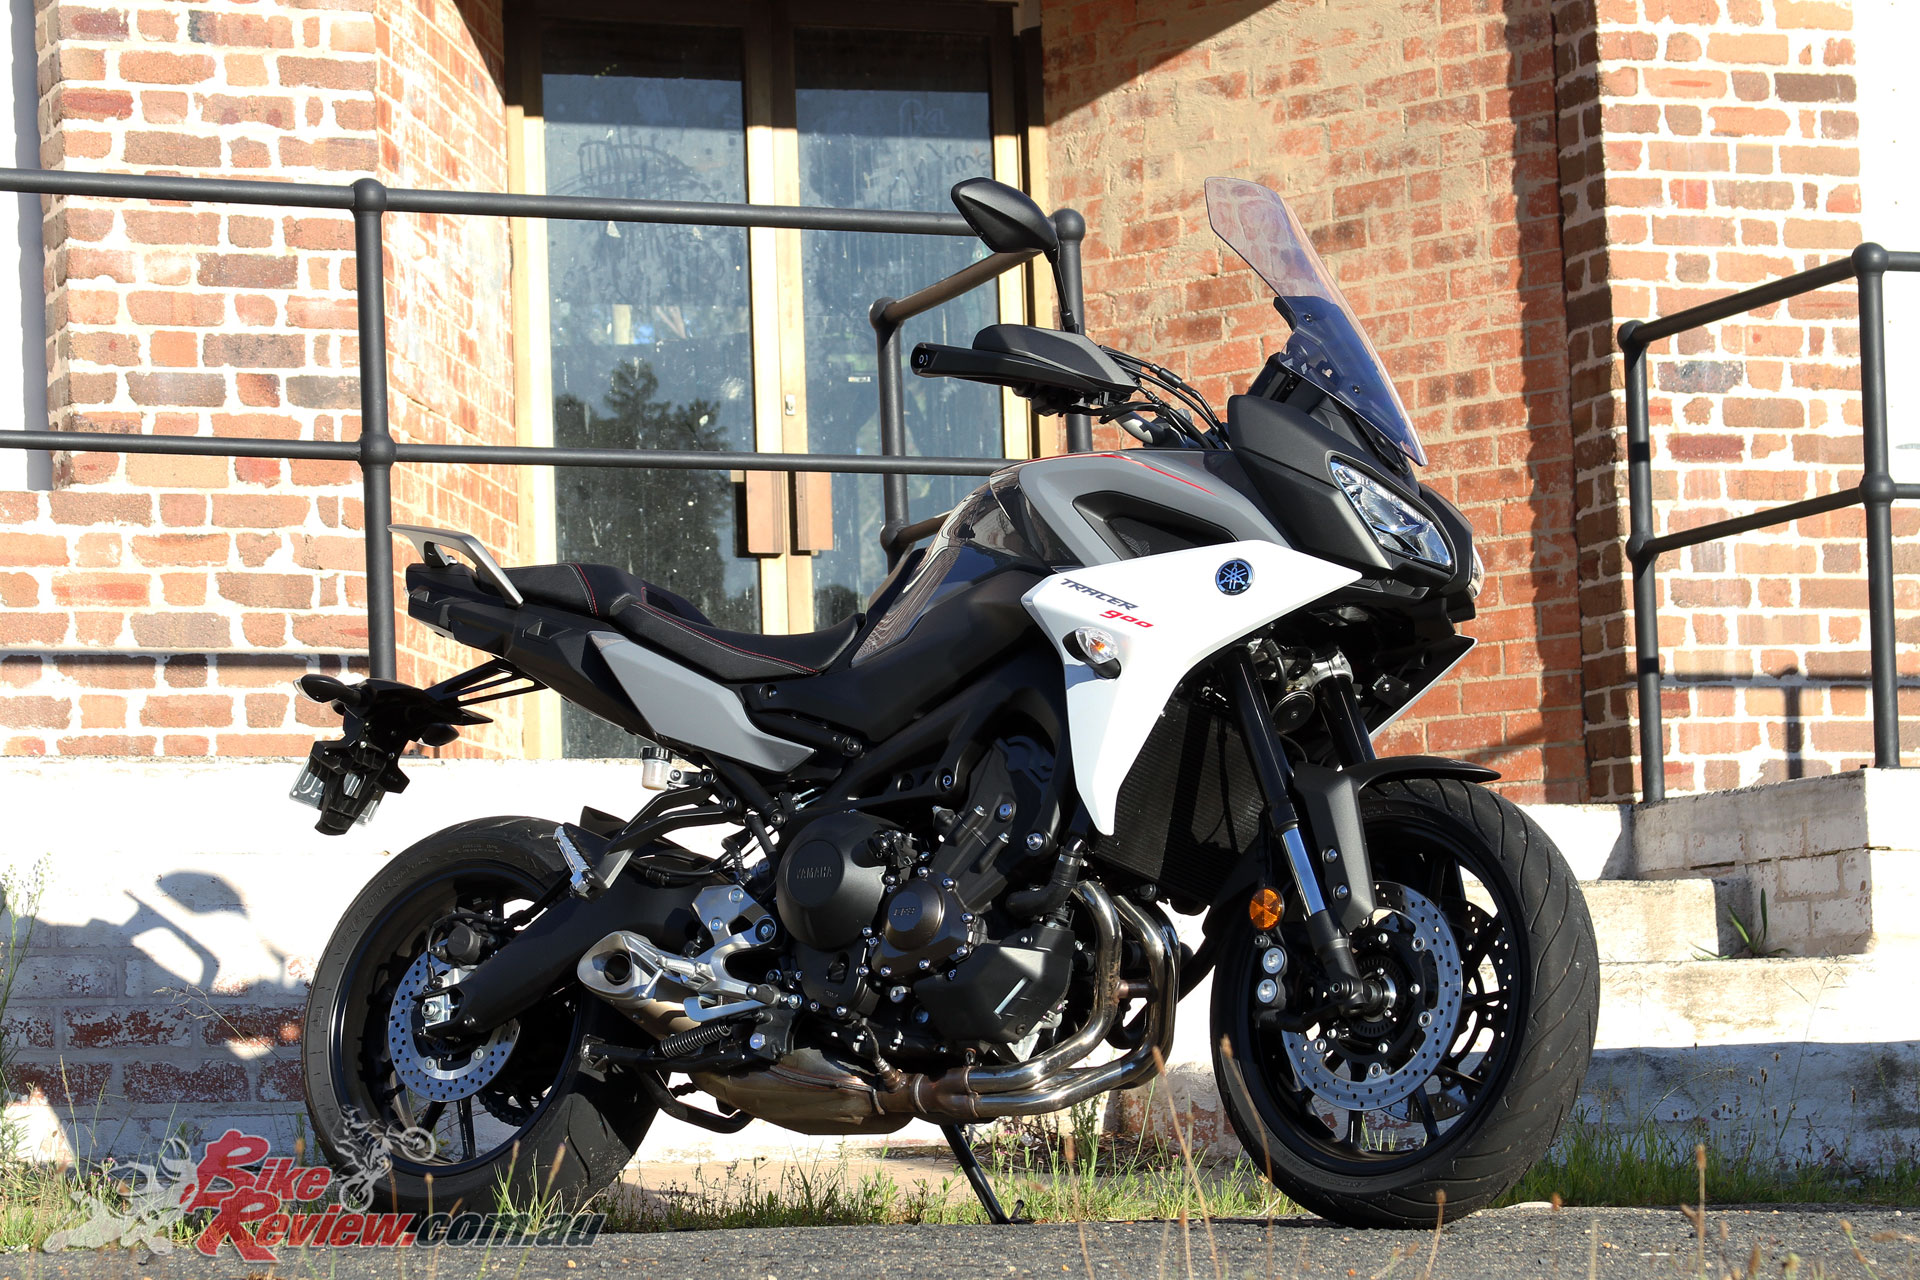 The Yamaha Tracer 900 is the latest generation of the brand's sports touring triple